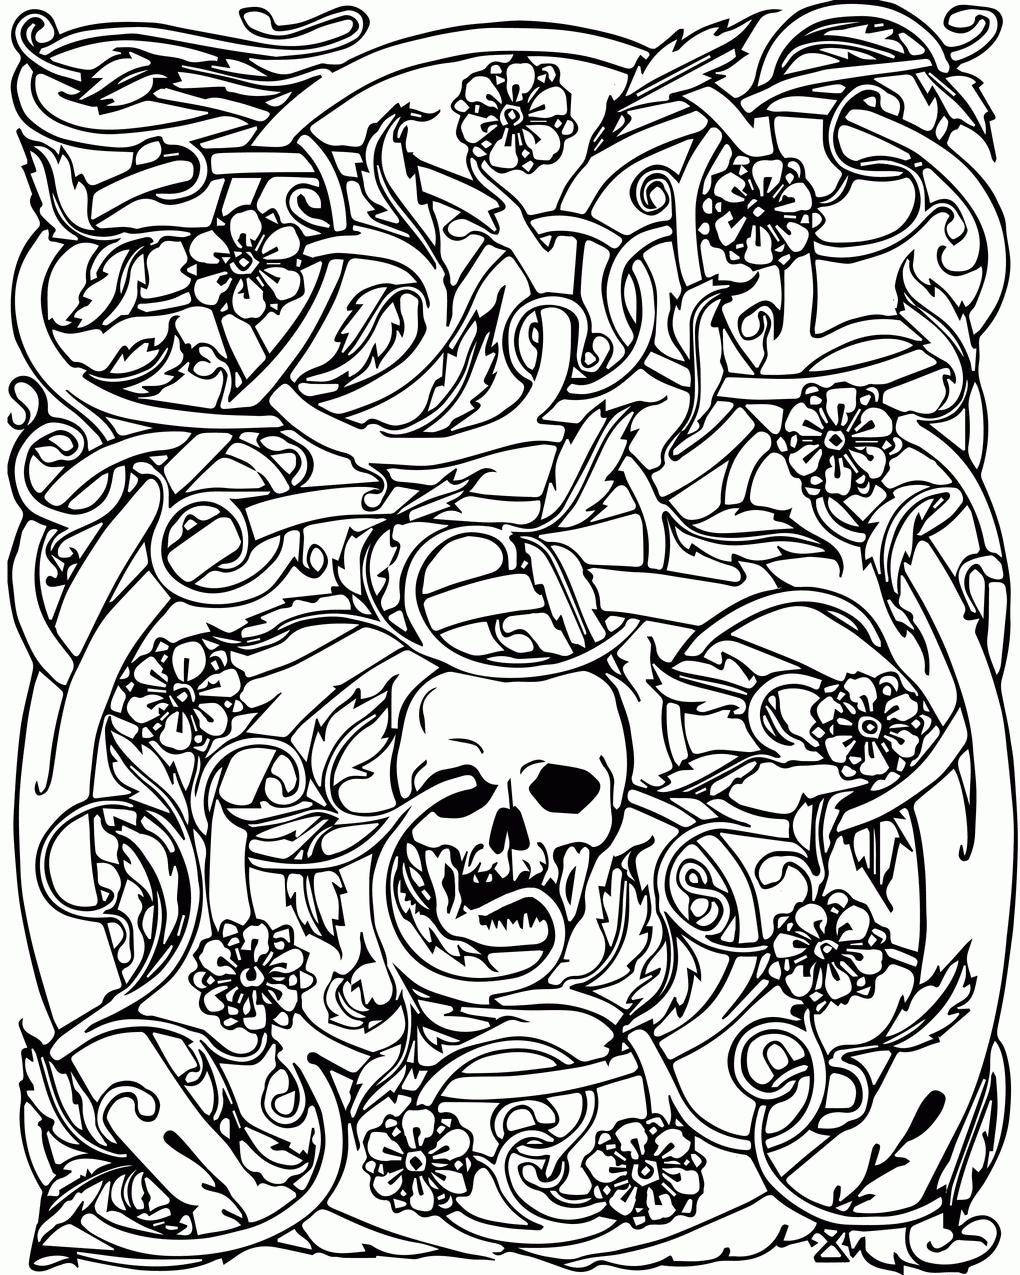 Free Adult Halloween Coloring Pages Â» Coloring Pages Kids